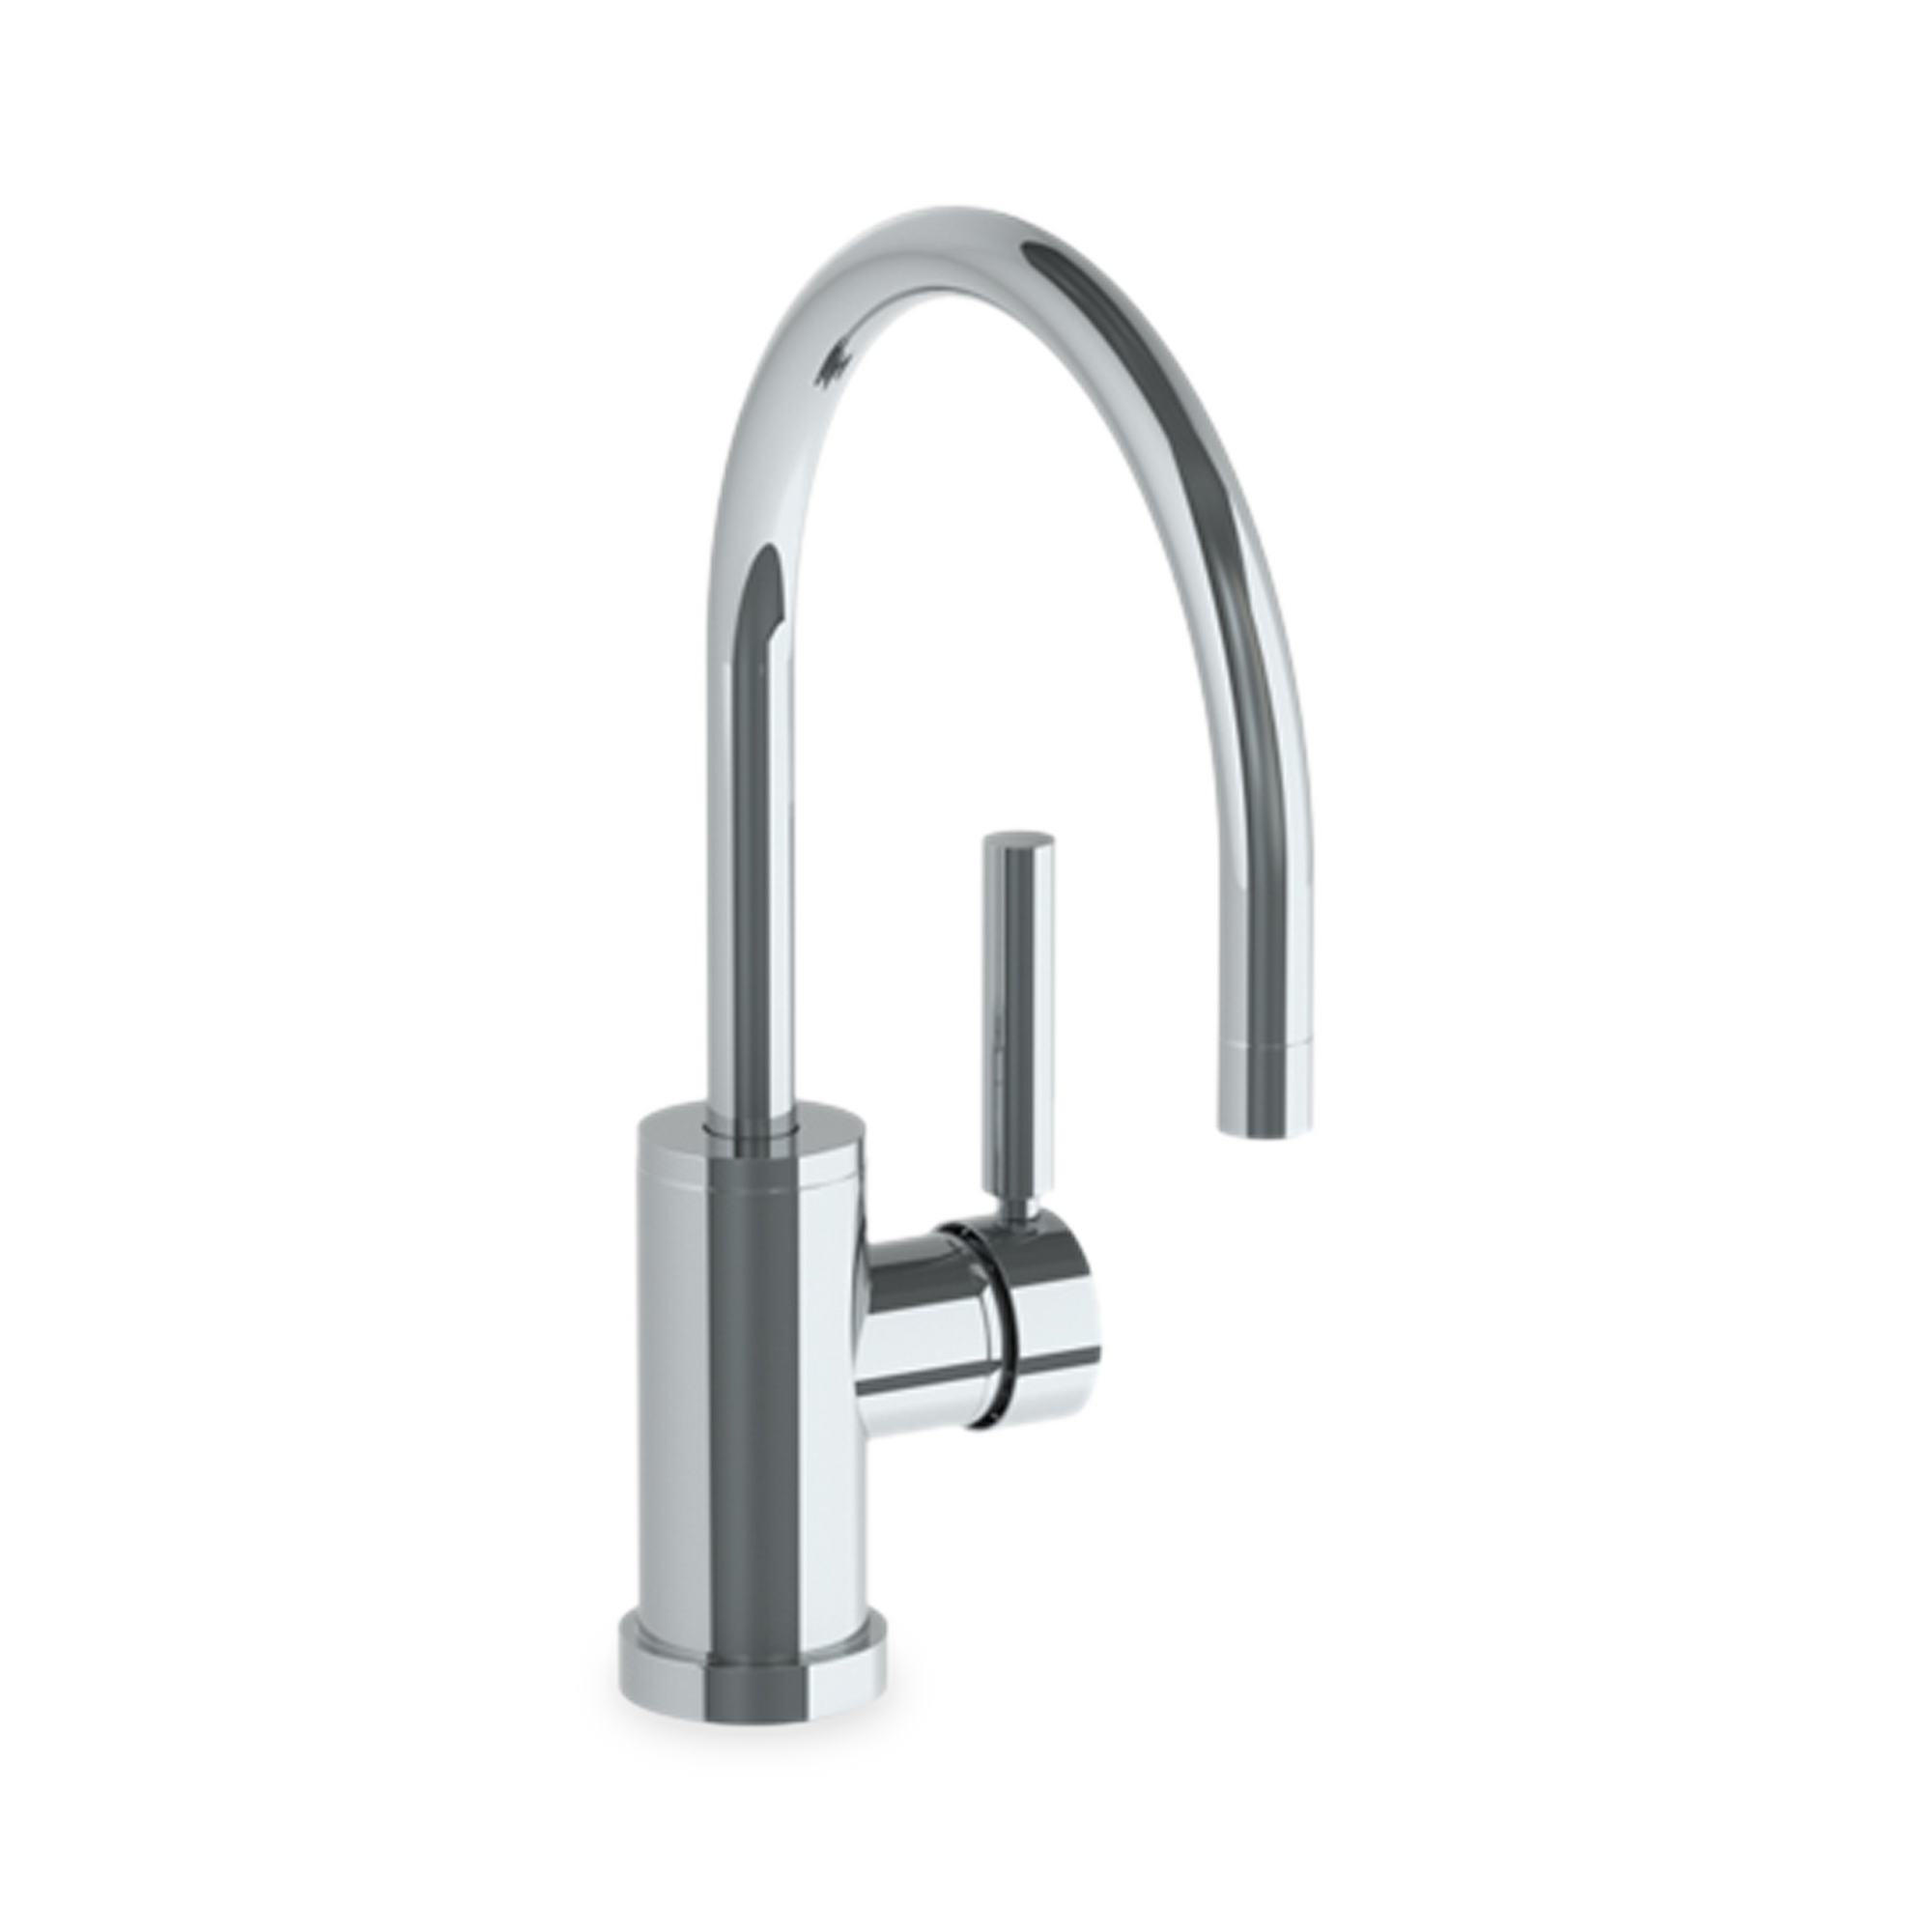 The Bridget Kitchen Faucet is a contemporary mixer with a single handle and hand spray.